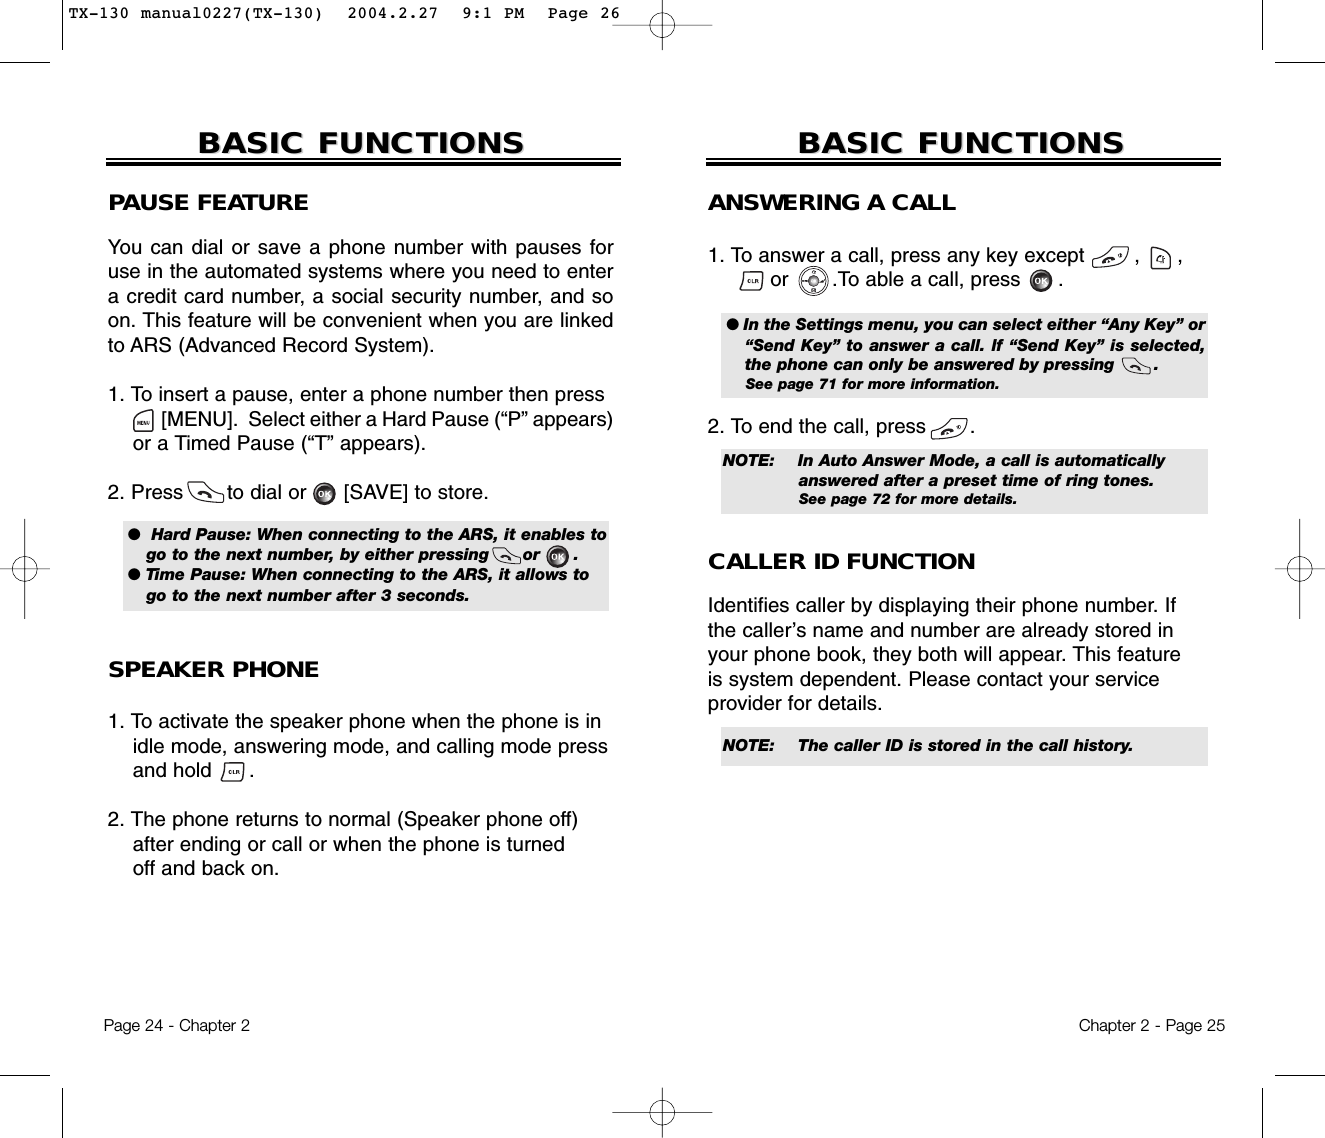 Chapter 2 - Page 25BASIC FUNCTIONSBASIC FUNCTIONSPage 24 - Chapter 2ANSWERING A CALL1. To answer a call, press any key except        ,      ,or       .To able a call, press      .2. To end the call, press       .● In the Settings menu, you can select either “Any Key” or“Send Key” to answer a call. lf “Send Key” is selected,the phone can only be answered by pressing       . See page 71 for more information.NOTE: In Auto Answer Mode, a call is automatically answered after a preset time of ring tones. See page 72 for more details.NOTE: The caller ID is stored in the call history.CALLER ID FUNCTIONIdentifies caller by displaying their phone number. Ifthe caller’s name and number are already stored inyour phone book, they both will appear. This featureis system dependent. Please contact your serviceprovider for details.BASIC FUNCTIONSBASIC FUNCTIONSPAUSE FEATUREYou can dial or save a phone number with pauses foruse in the automated systems where you need to entera credit card number, a social security number, and soon. This feature will be convenient when you are linkedto ARS (Advanced Record System).1. To insert a pause, enter a phone number then press[MENU].  Select either a Hard Pause (“P” appears)or a Timed Pause (“T” appears).2. Press       to dial or      [SAVE] to store.SPEAKER PHONE1. To activate the speaker phone when the phone is in idle mode, answering mode, and calling mode press and hold      . 2. The phone returns to normal (Speaker phone off)after ending or call or when the phone is turnedoff and back on.●  Hard Pause: When connecting to the ARS, it enables togo to the next number, by either pressing      or      .● Time Pause: When connecting to the ARS, it allows togo to the next number after 3 seconds.TX-130 manual0227(TX-130)  2004.2.27  9:1 PM  Page 26